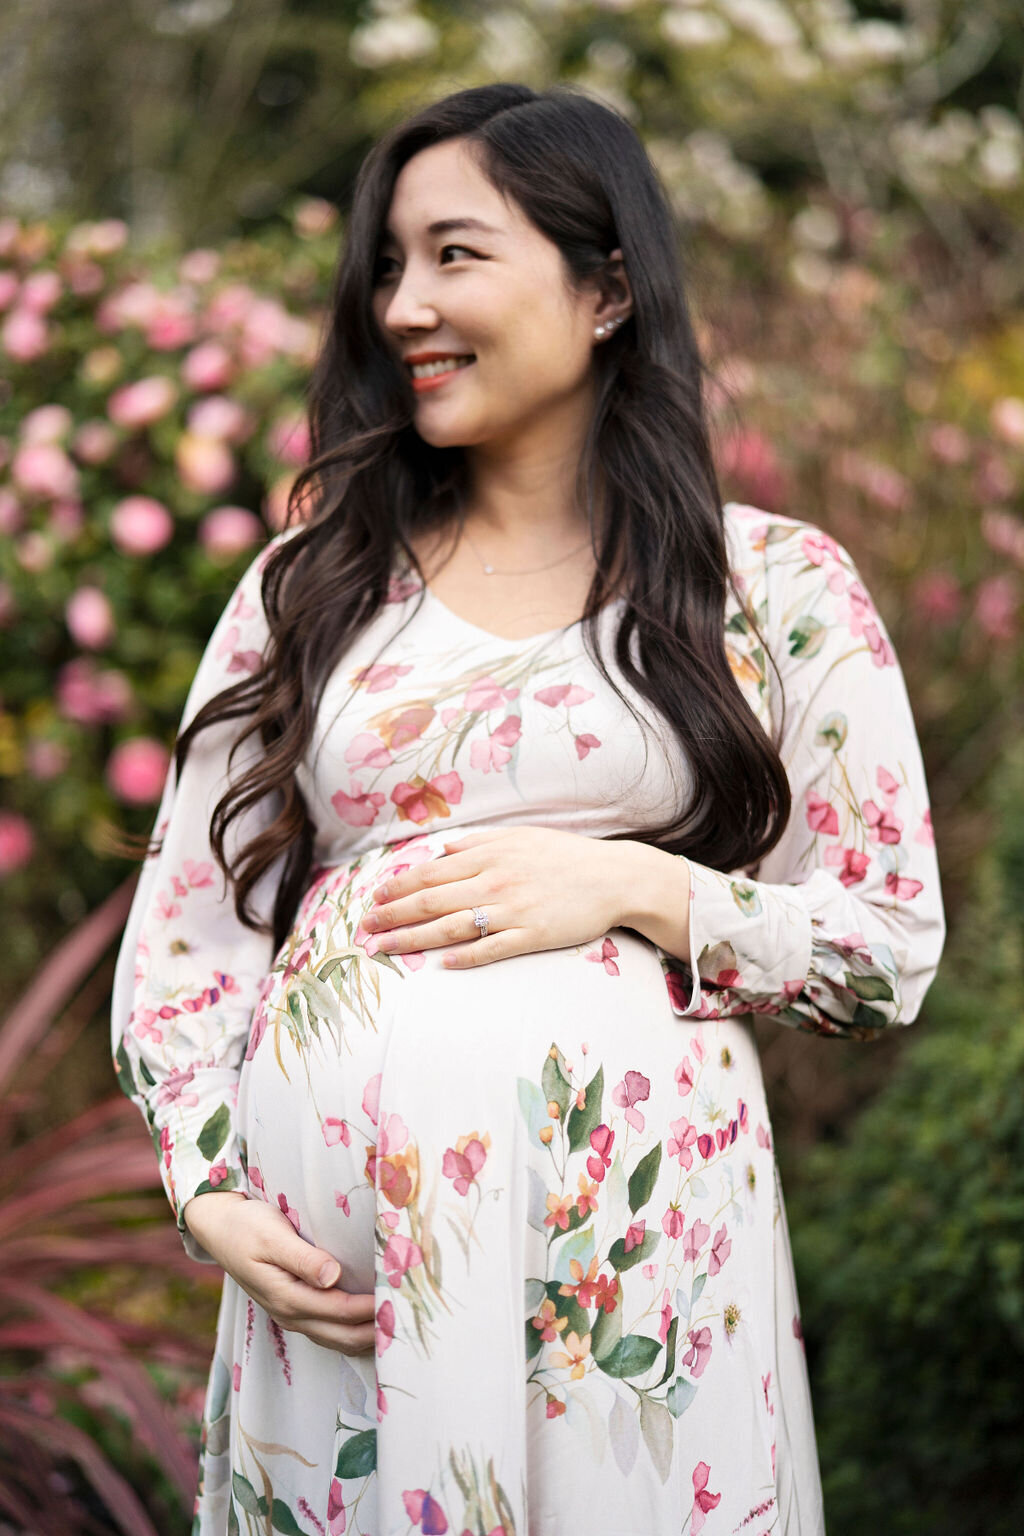 Pregnant lady wearing flowery dress standing against a backdrop of spring flowers during a springtime photoshoot